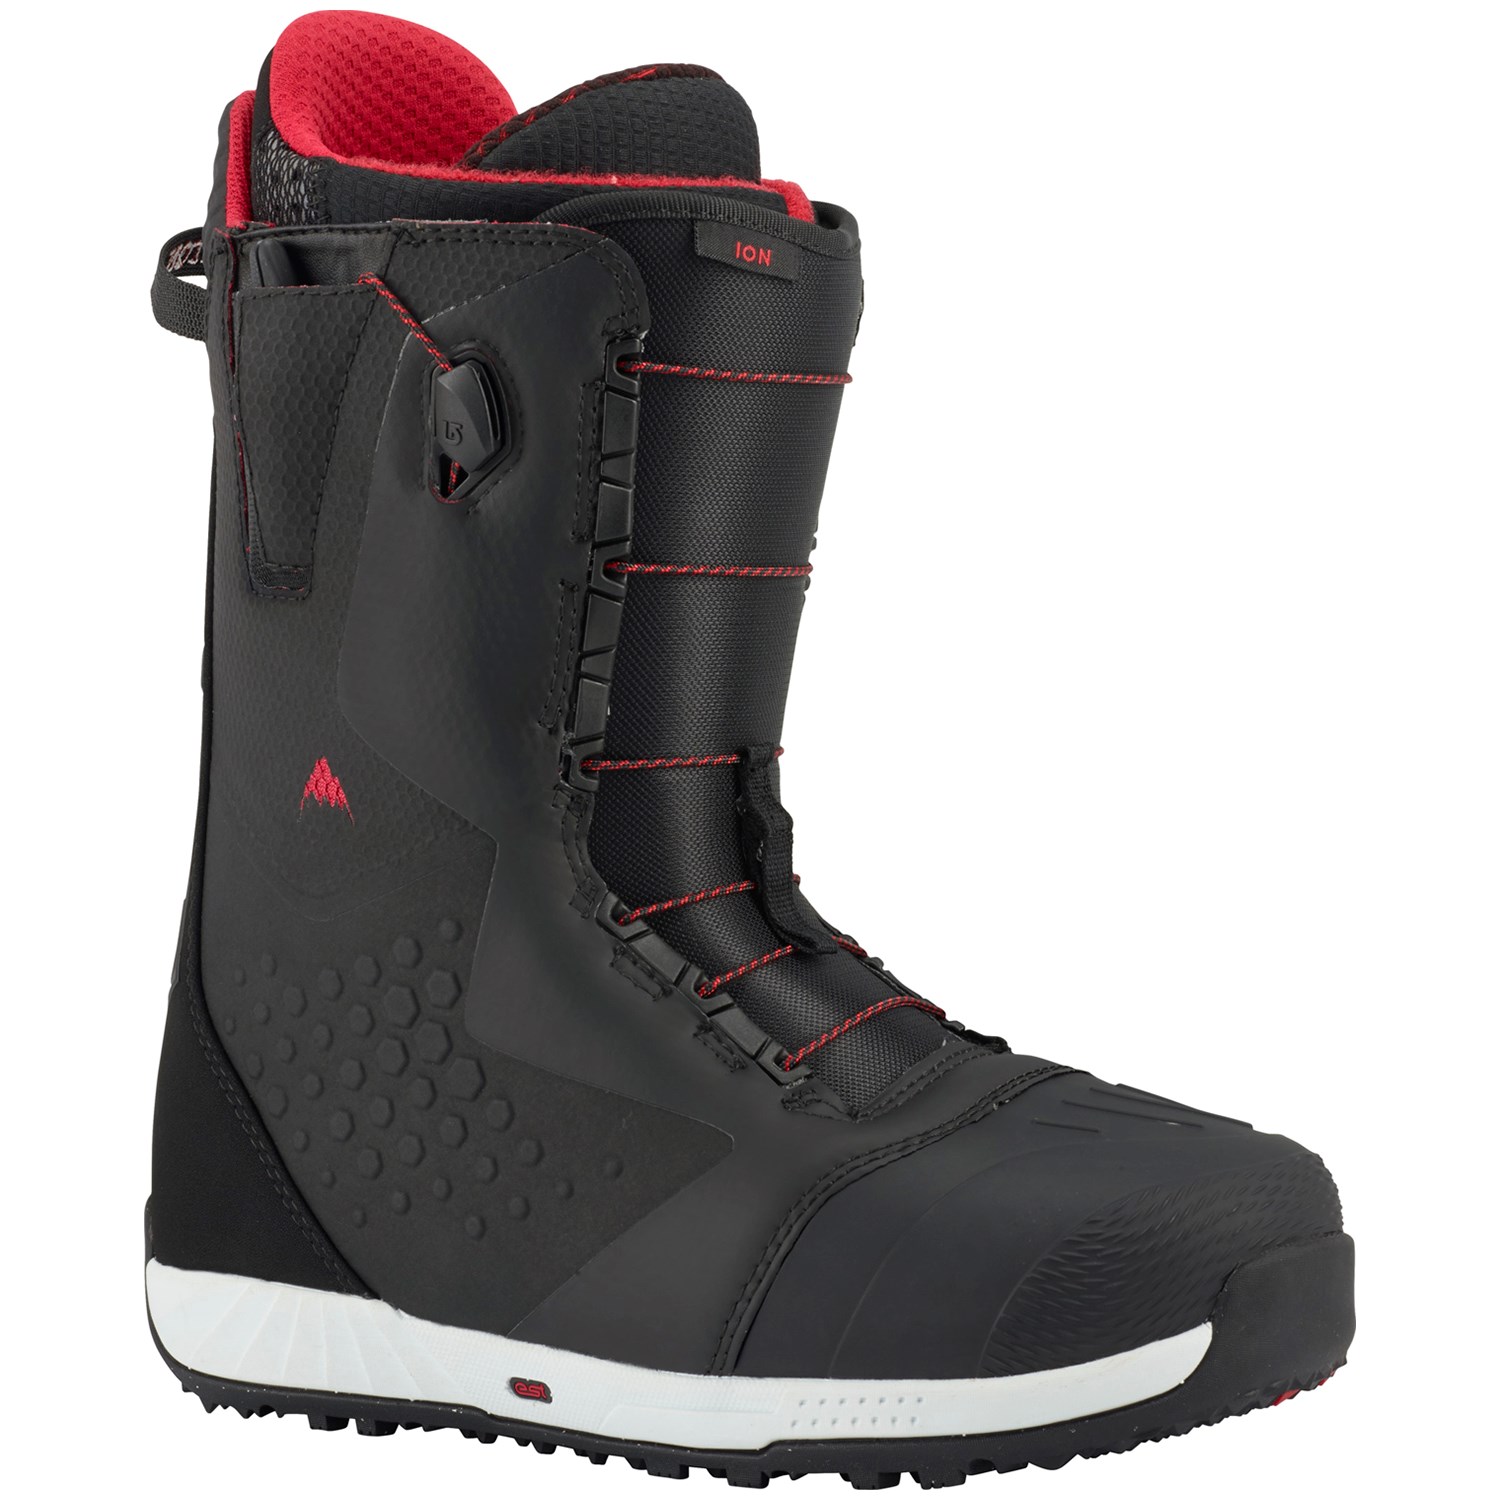 Burton Ion Snowboard Boots 2018 Evo in How To Break In New Snowboard Boots